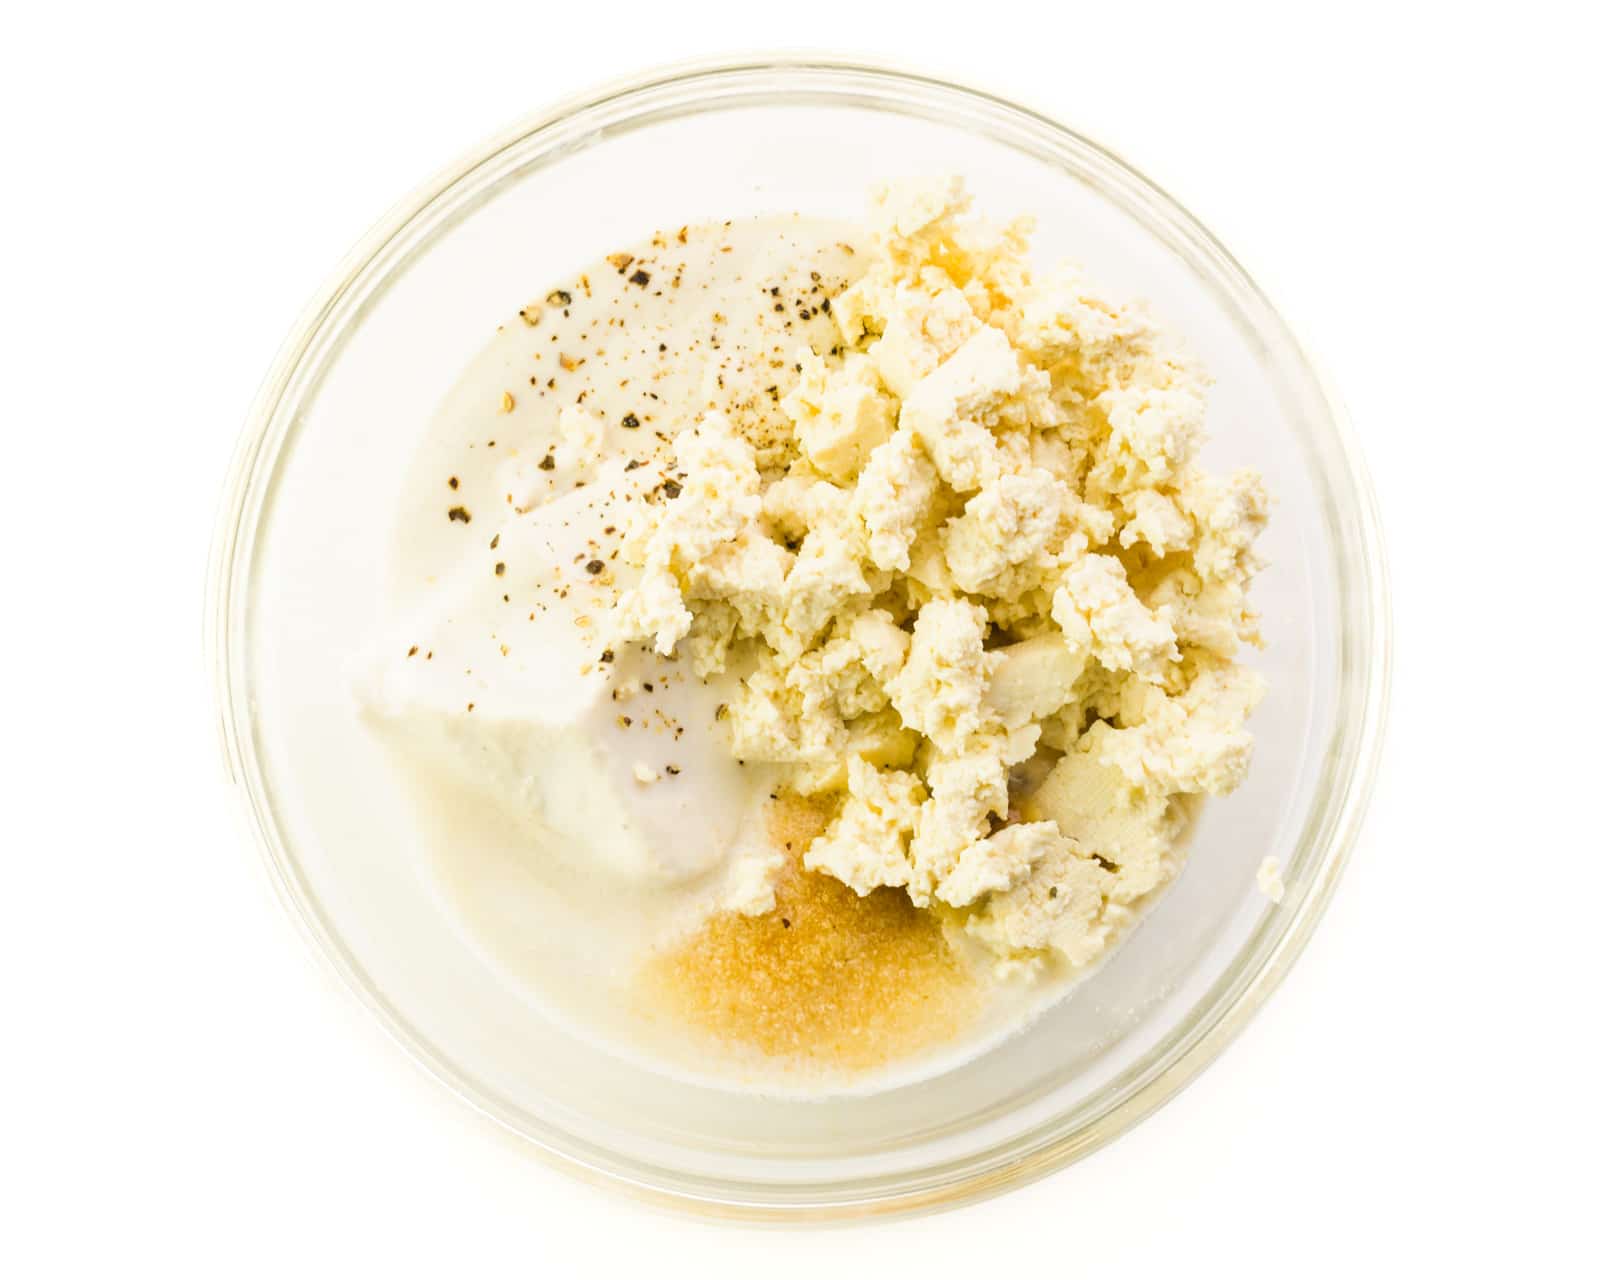 Ingredients are in the bottom of a glass bowl, including vegan sour cream, garlic, powder, and crumbled tofu.